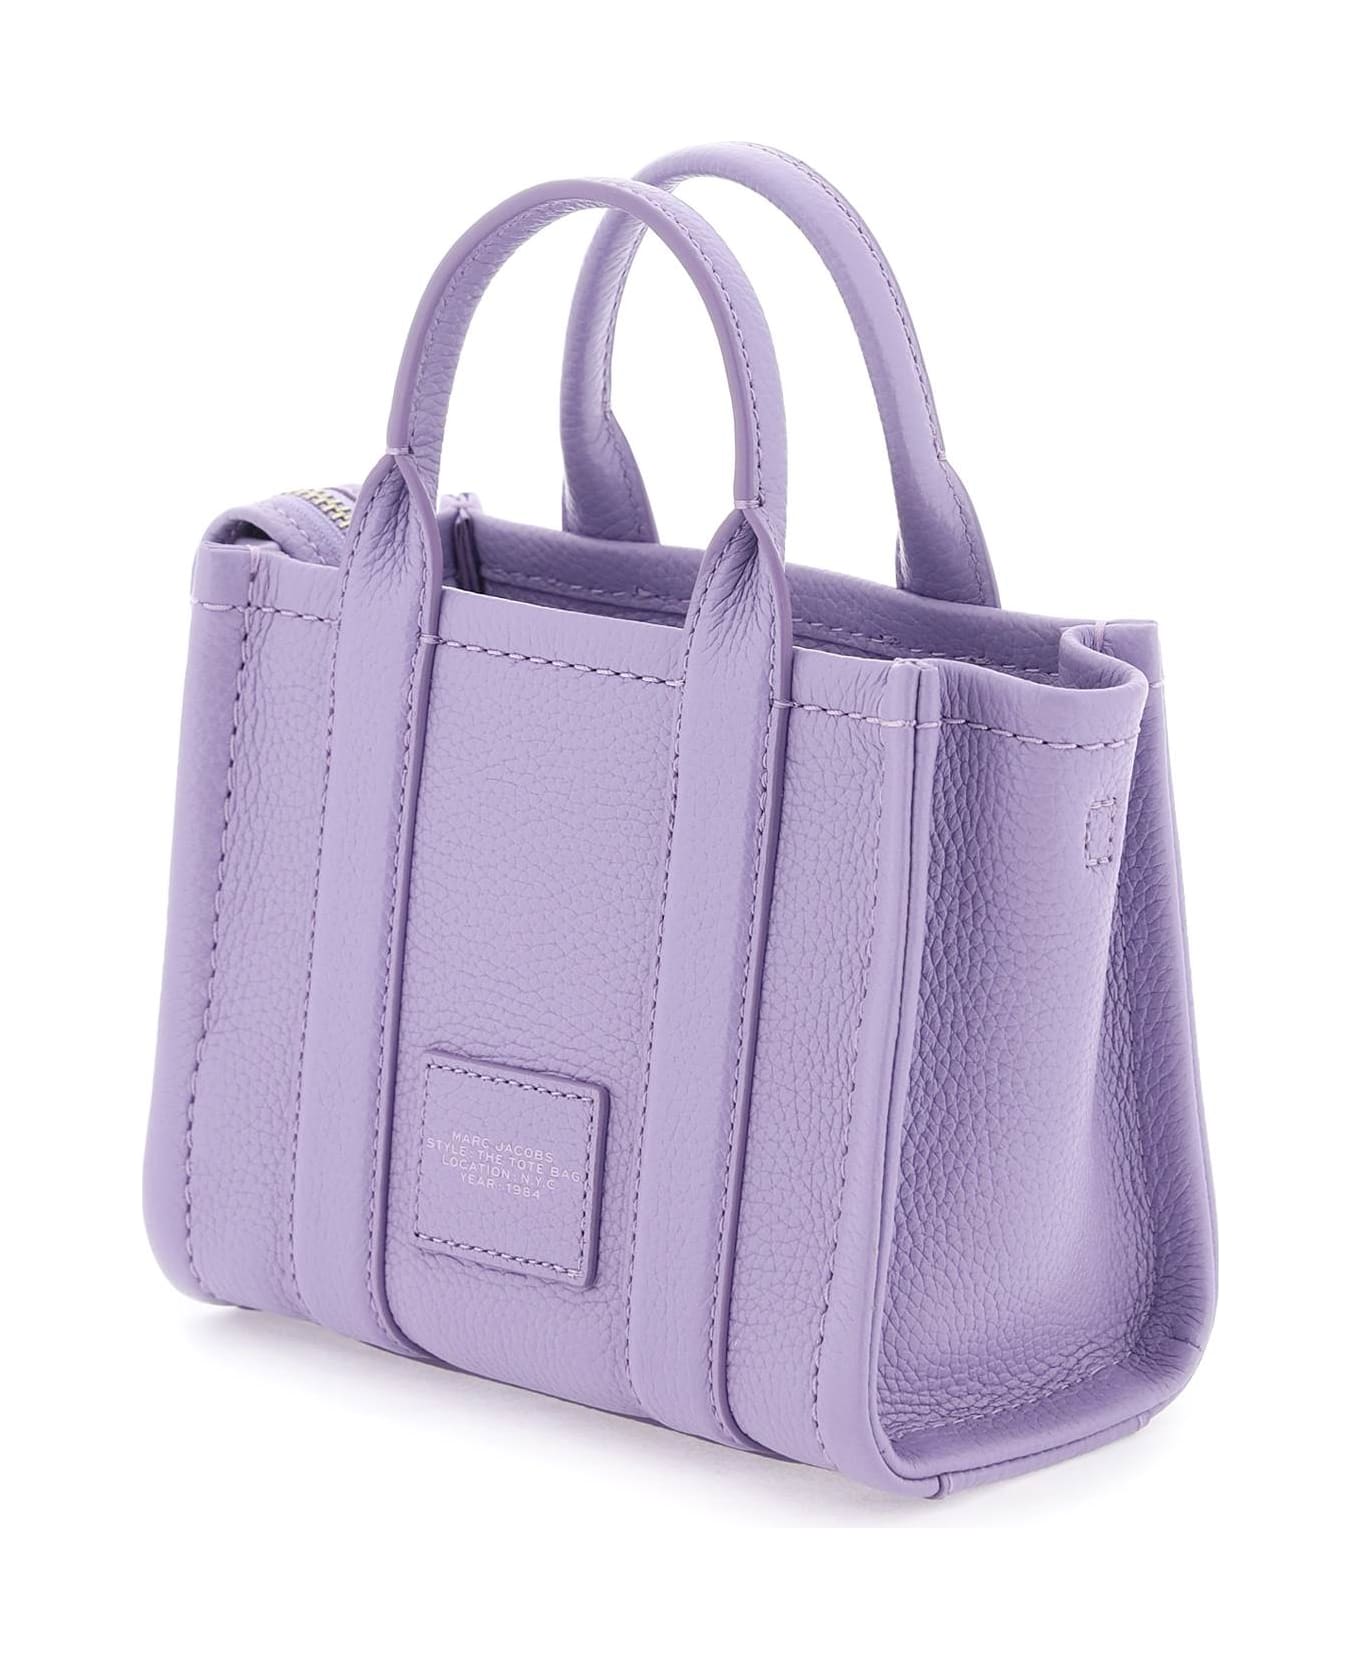 Marc Jacobs The Leather Tote Bag - LAVENDER (Purple) トートバッグ